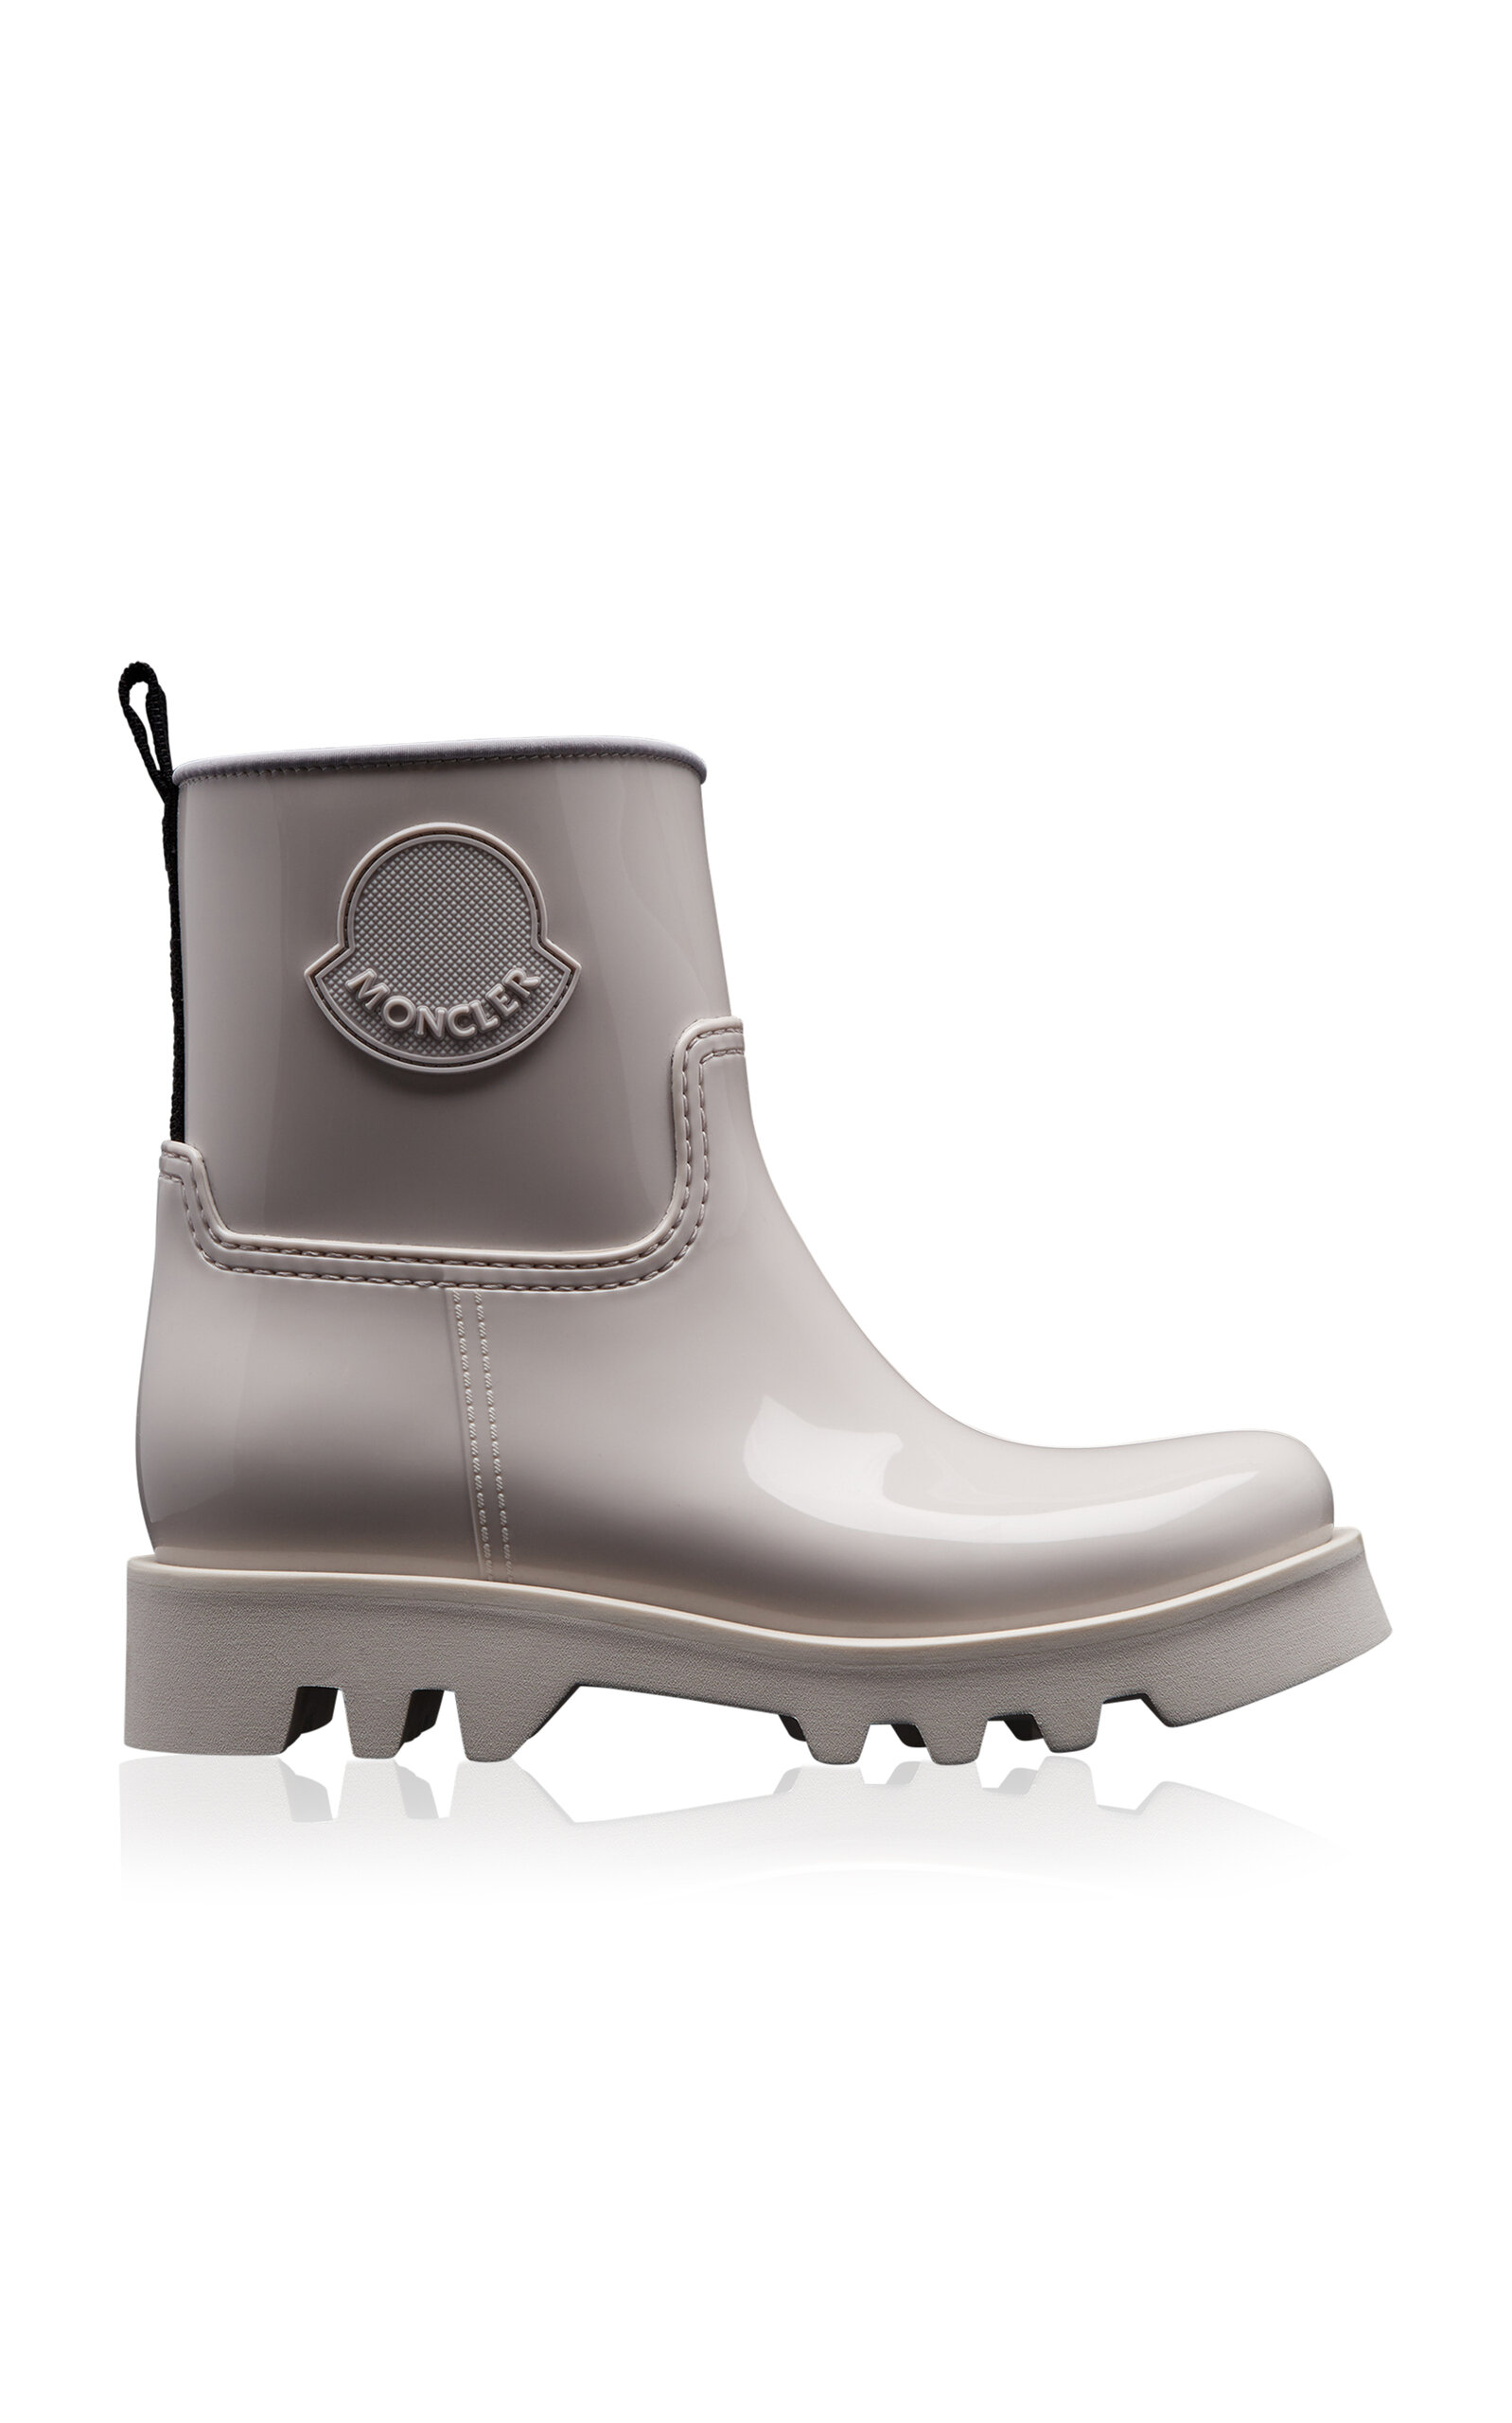 Moncler Ginette Rubber Rain Boots In Grey